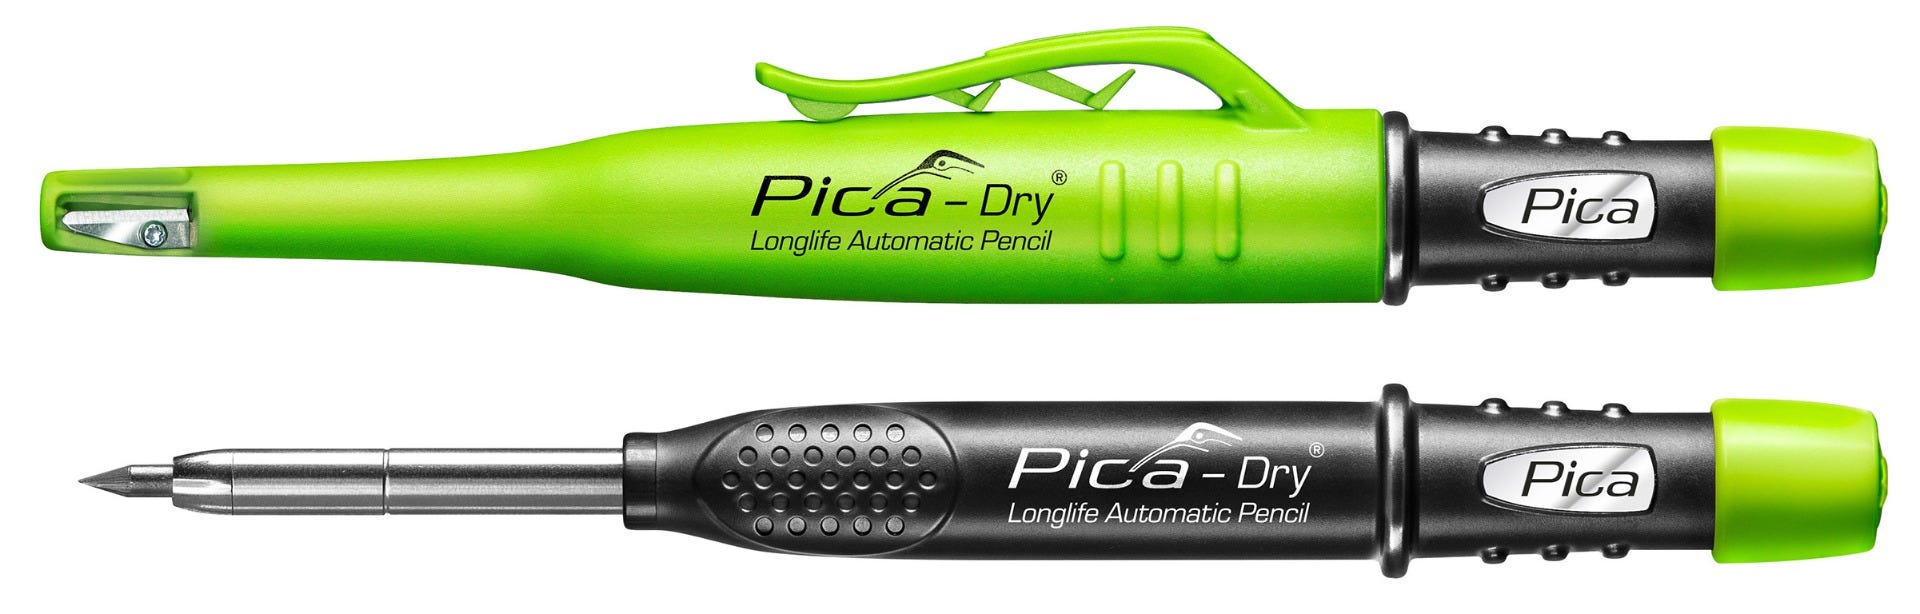 Pica Dry 3030 Pencil - New Improved!